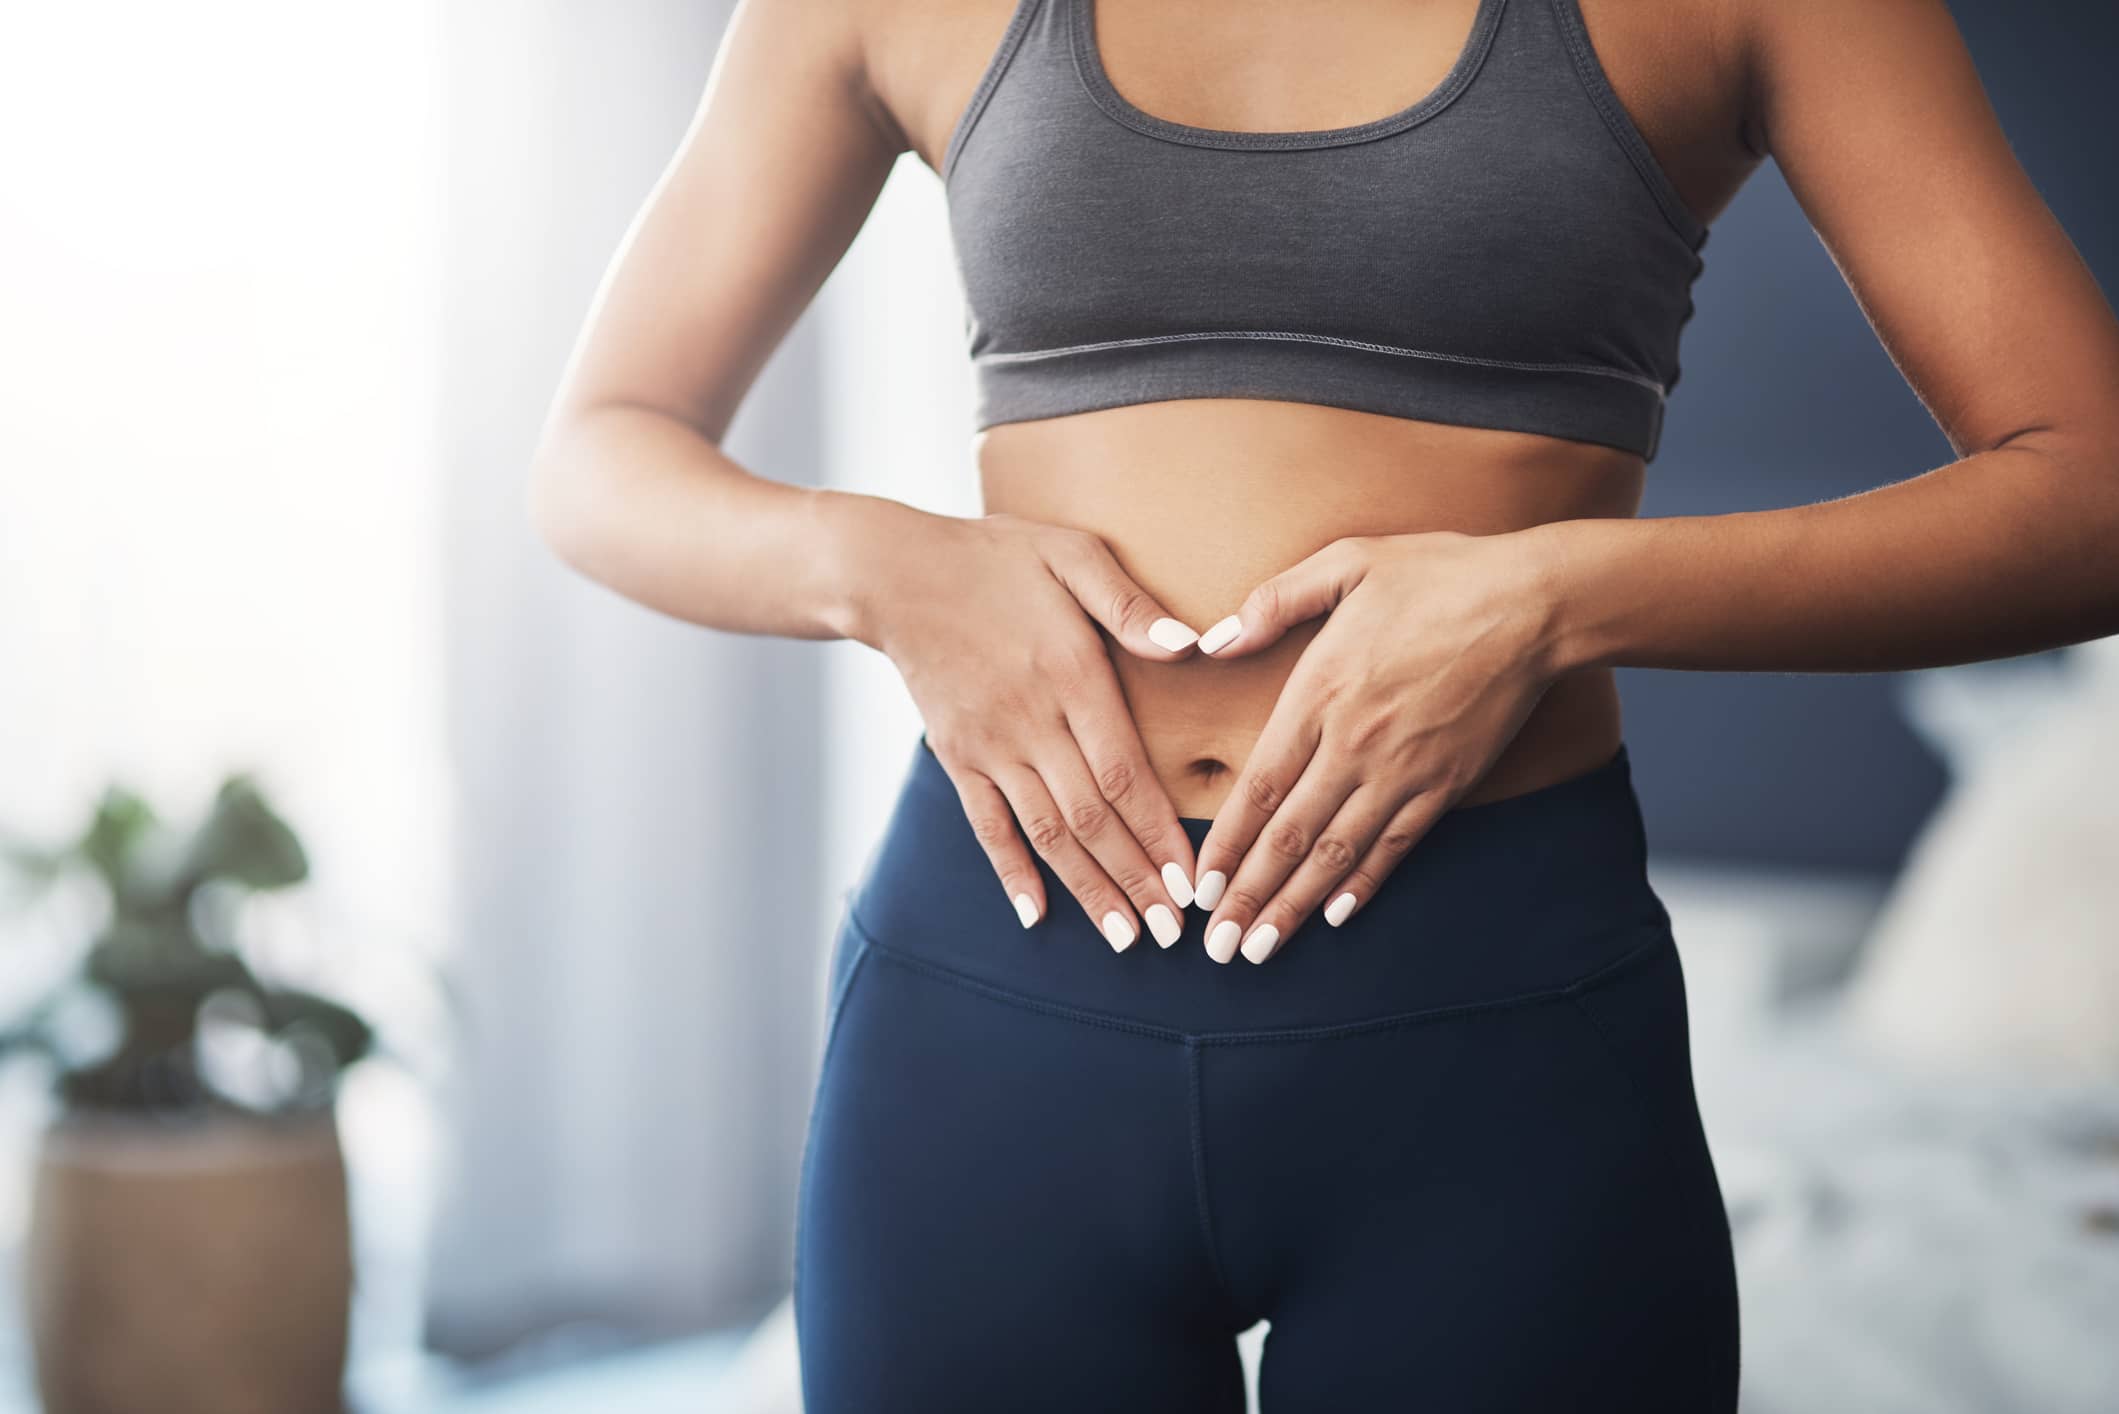 How to get rid of a bloated stomach